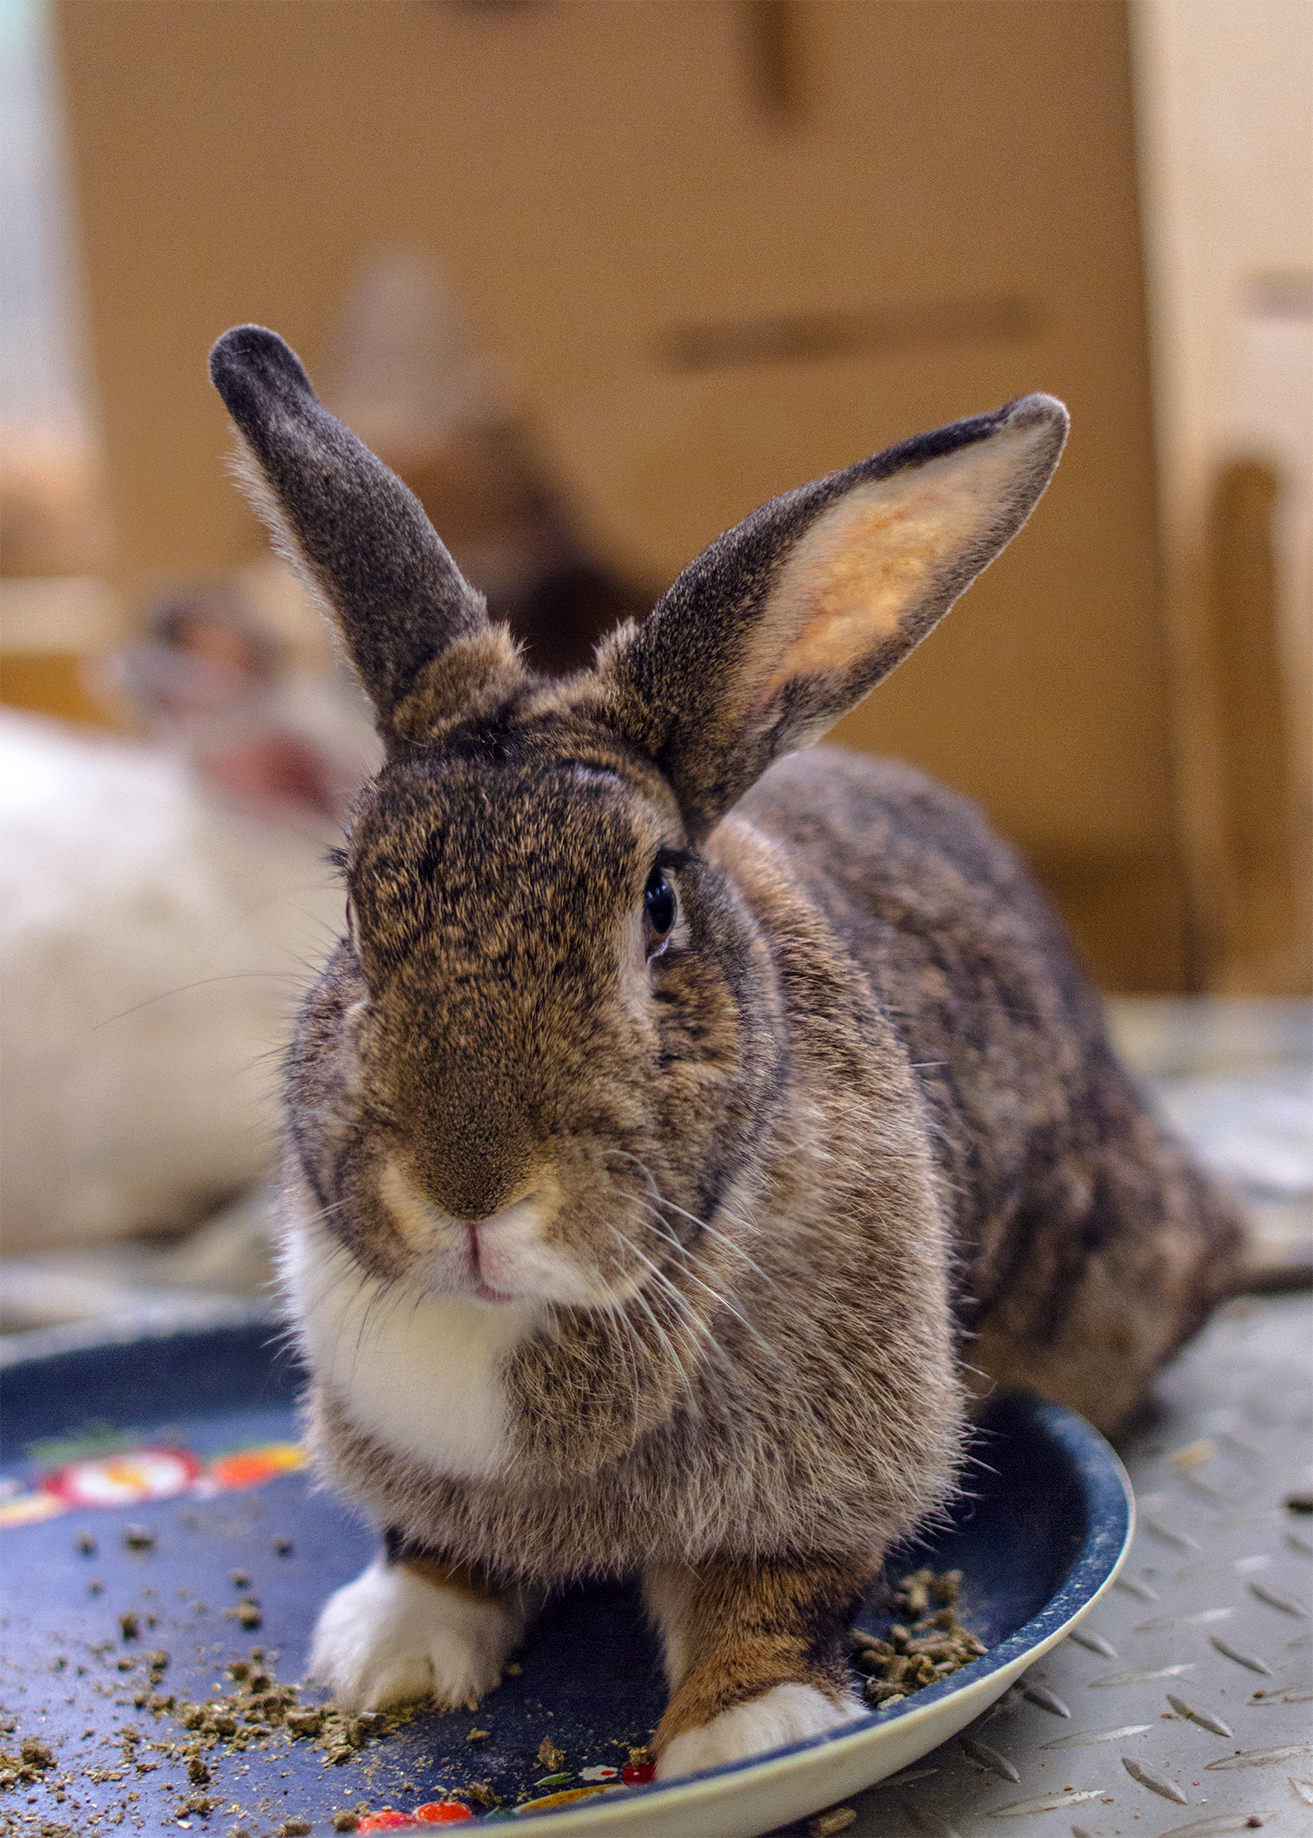 Rabbit pellets are another topic that can cause a great deal of debate in the rabbit community.